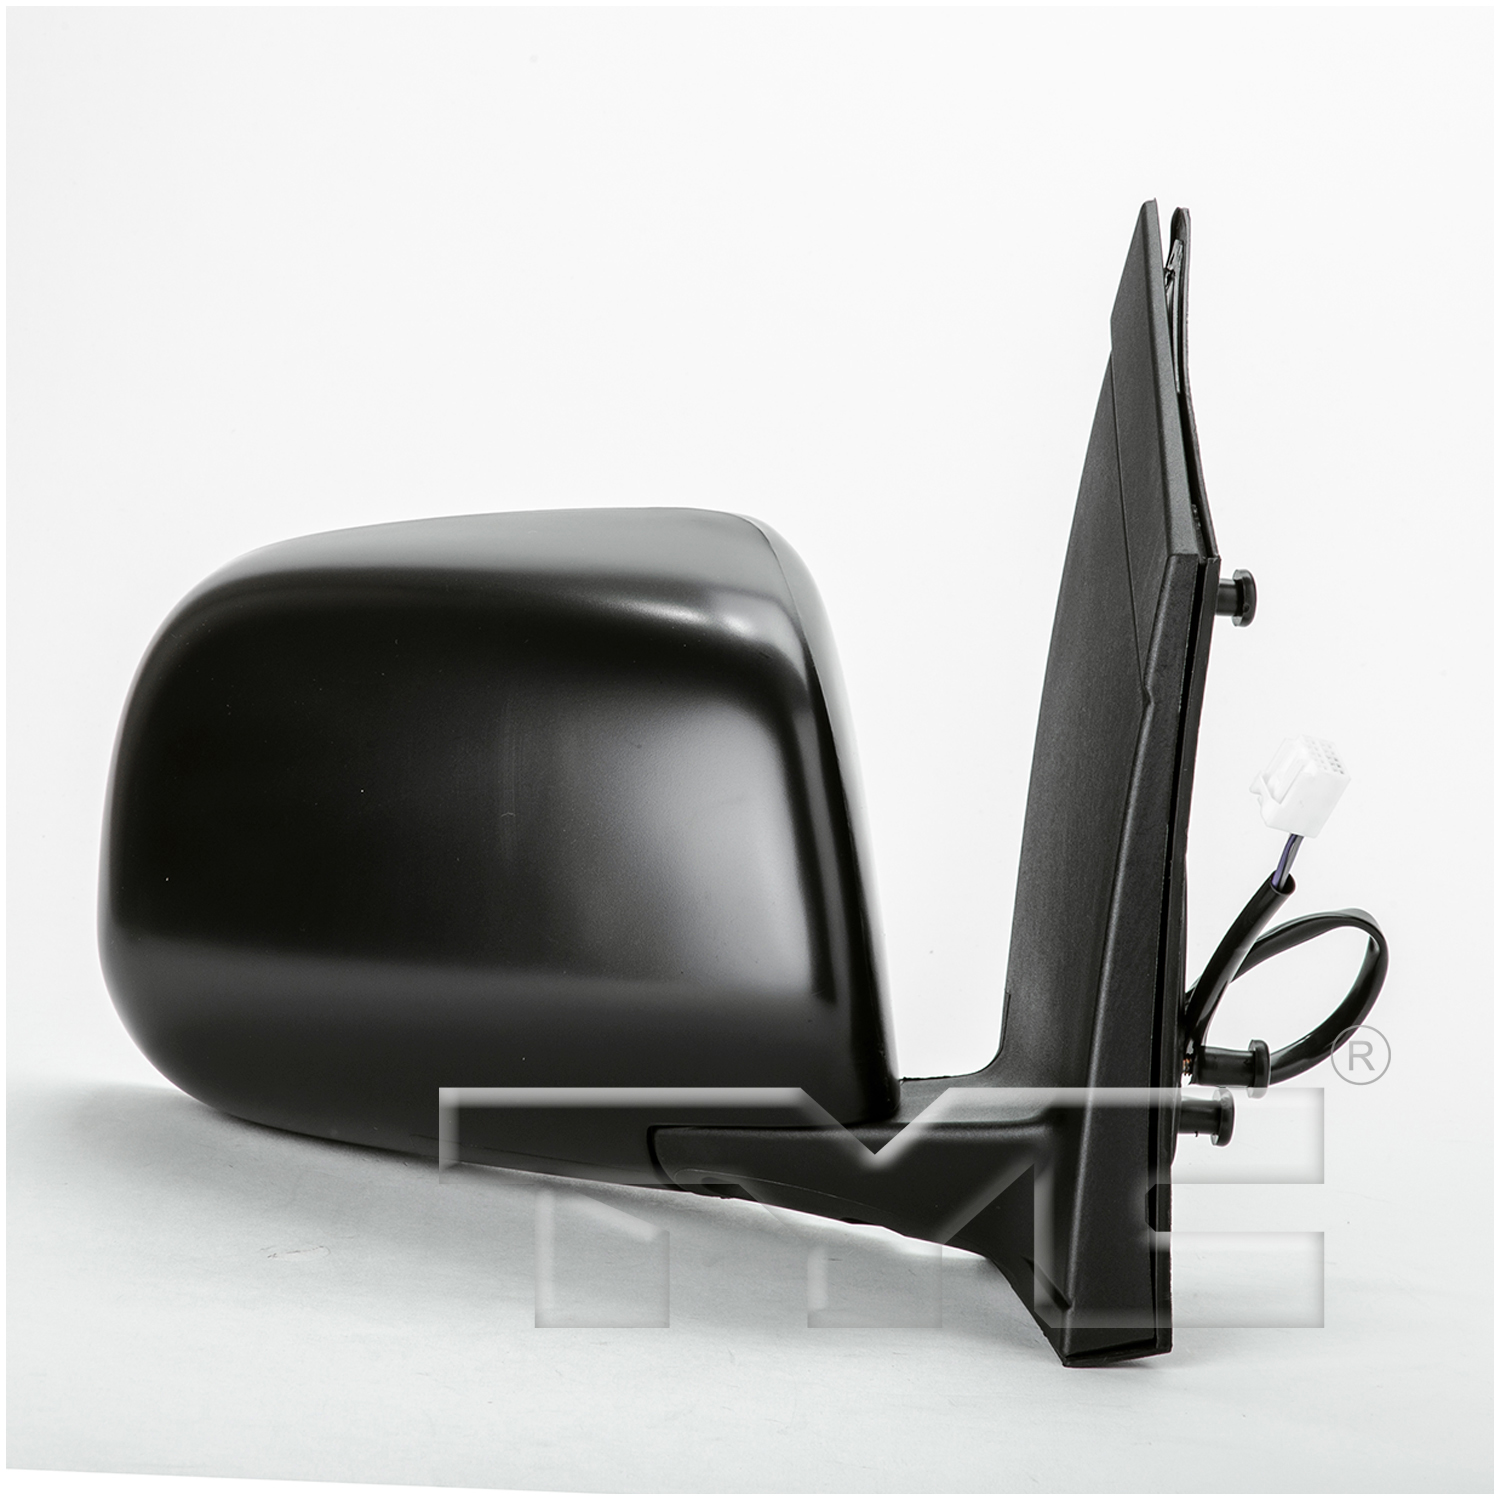 Aftermarket MIRRORS for TOYOTA - SIENNA, SIENNA,04-10,RT Mirror outside rear view